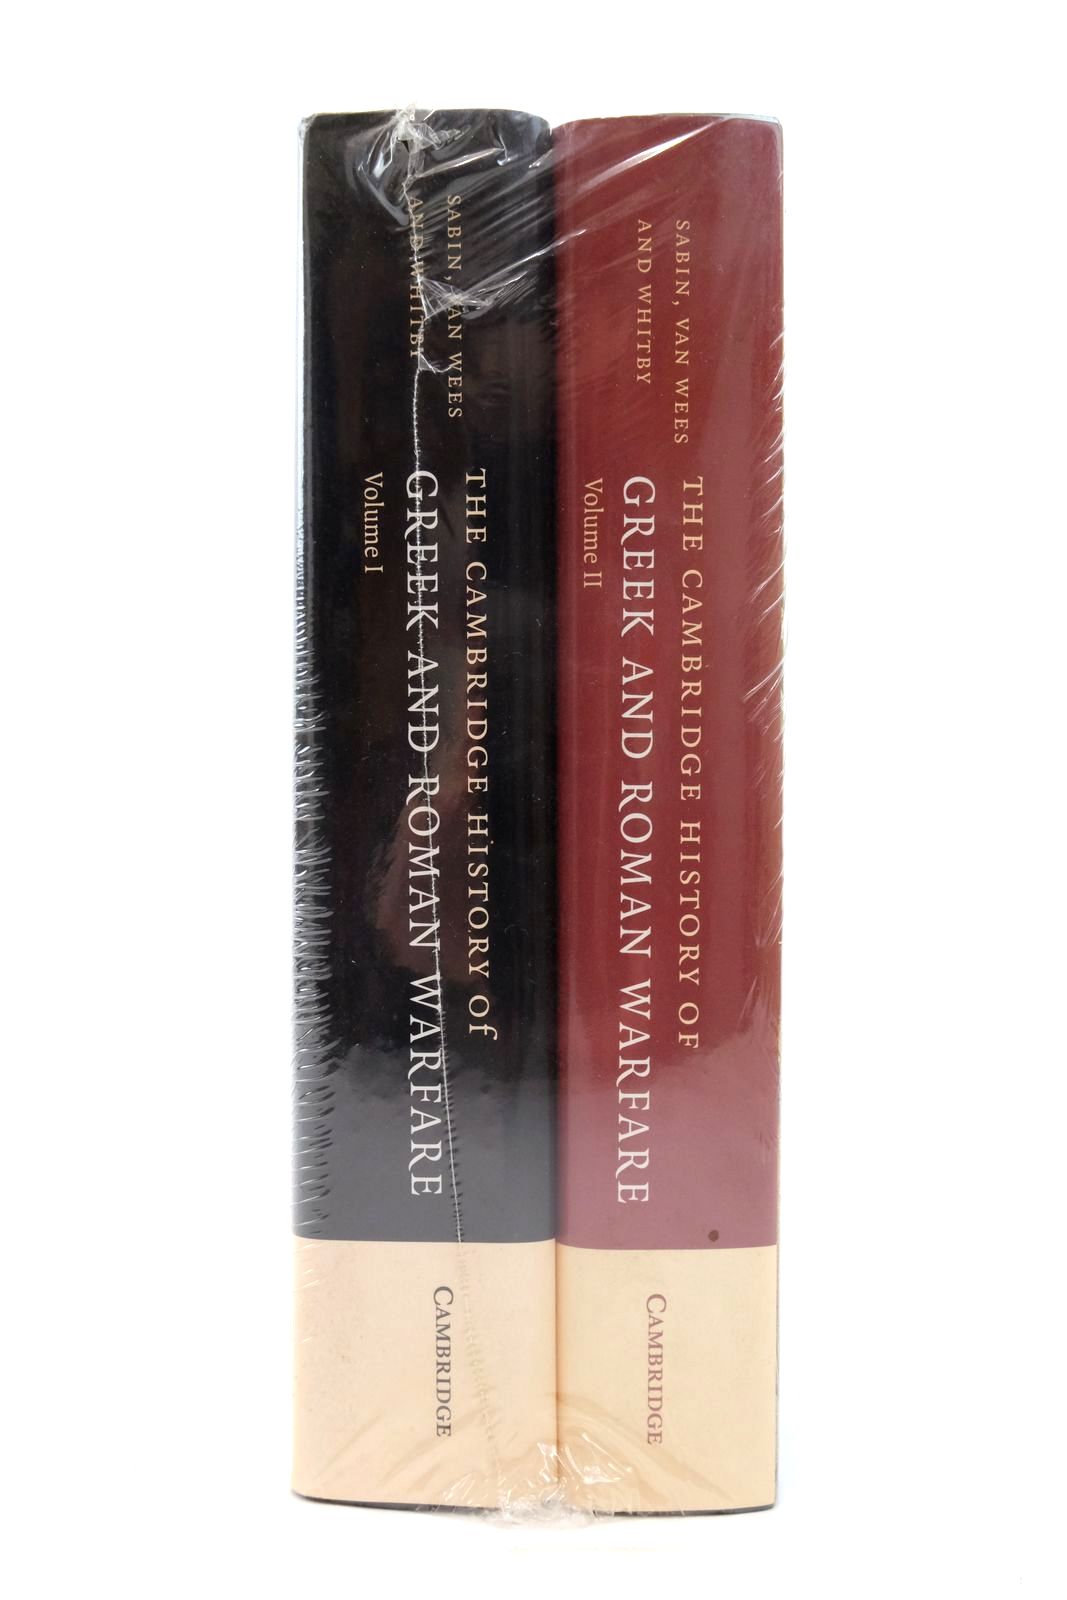 Photo of THE CAMBRIDGE HISTORY OF GREEK AND ROMAN WARFARE (2 VOLUMES) written by Sabin, Philip
Van Wees, Hans
Whitby, Michael published by Cambridge University Press (STOCK CODE: 2136589)  for sale by Stella & Rose's Books